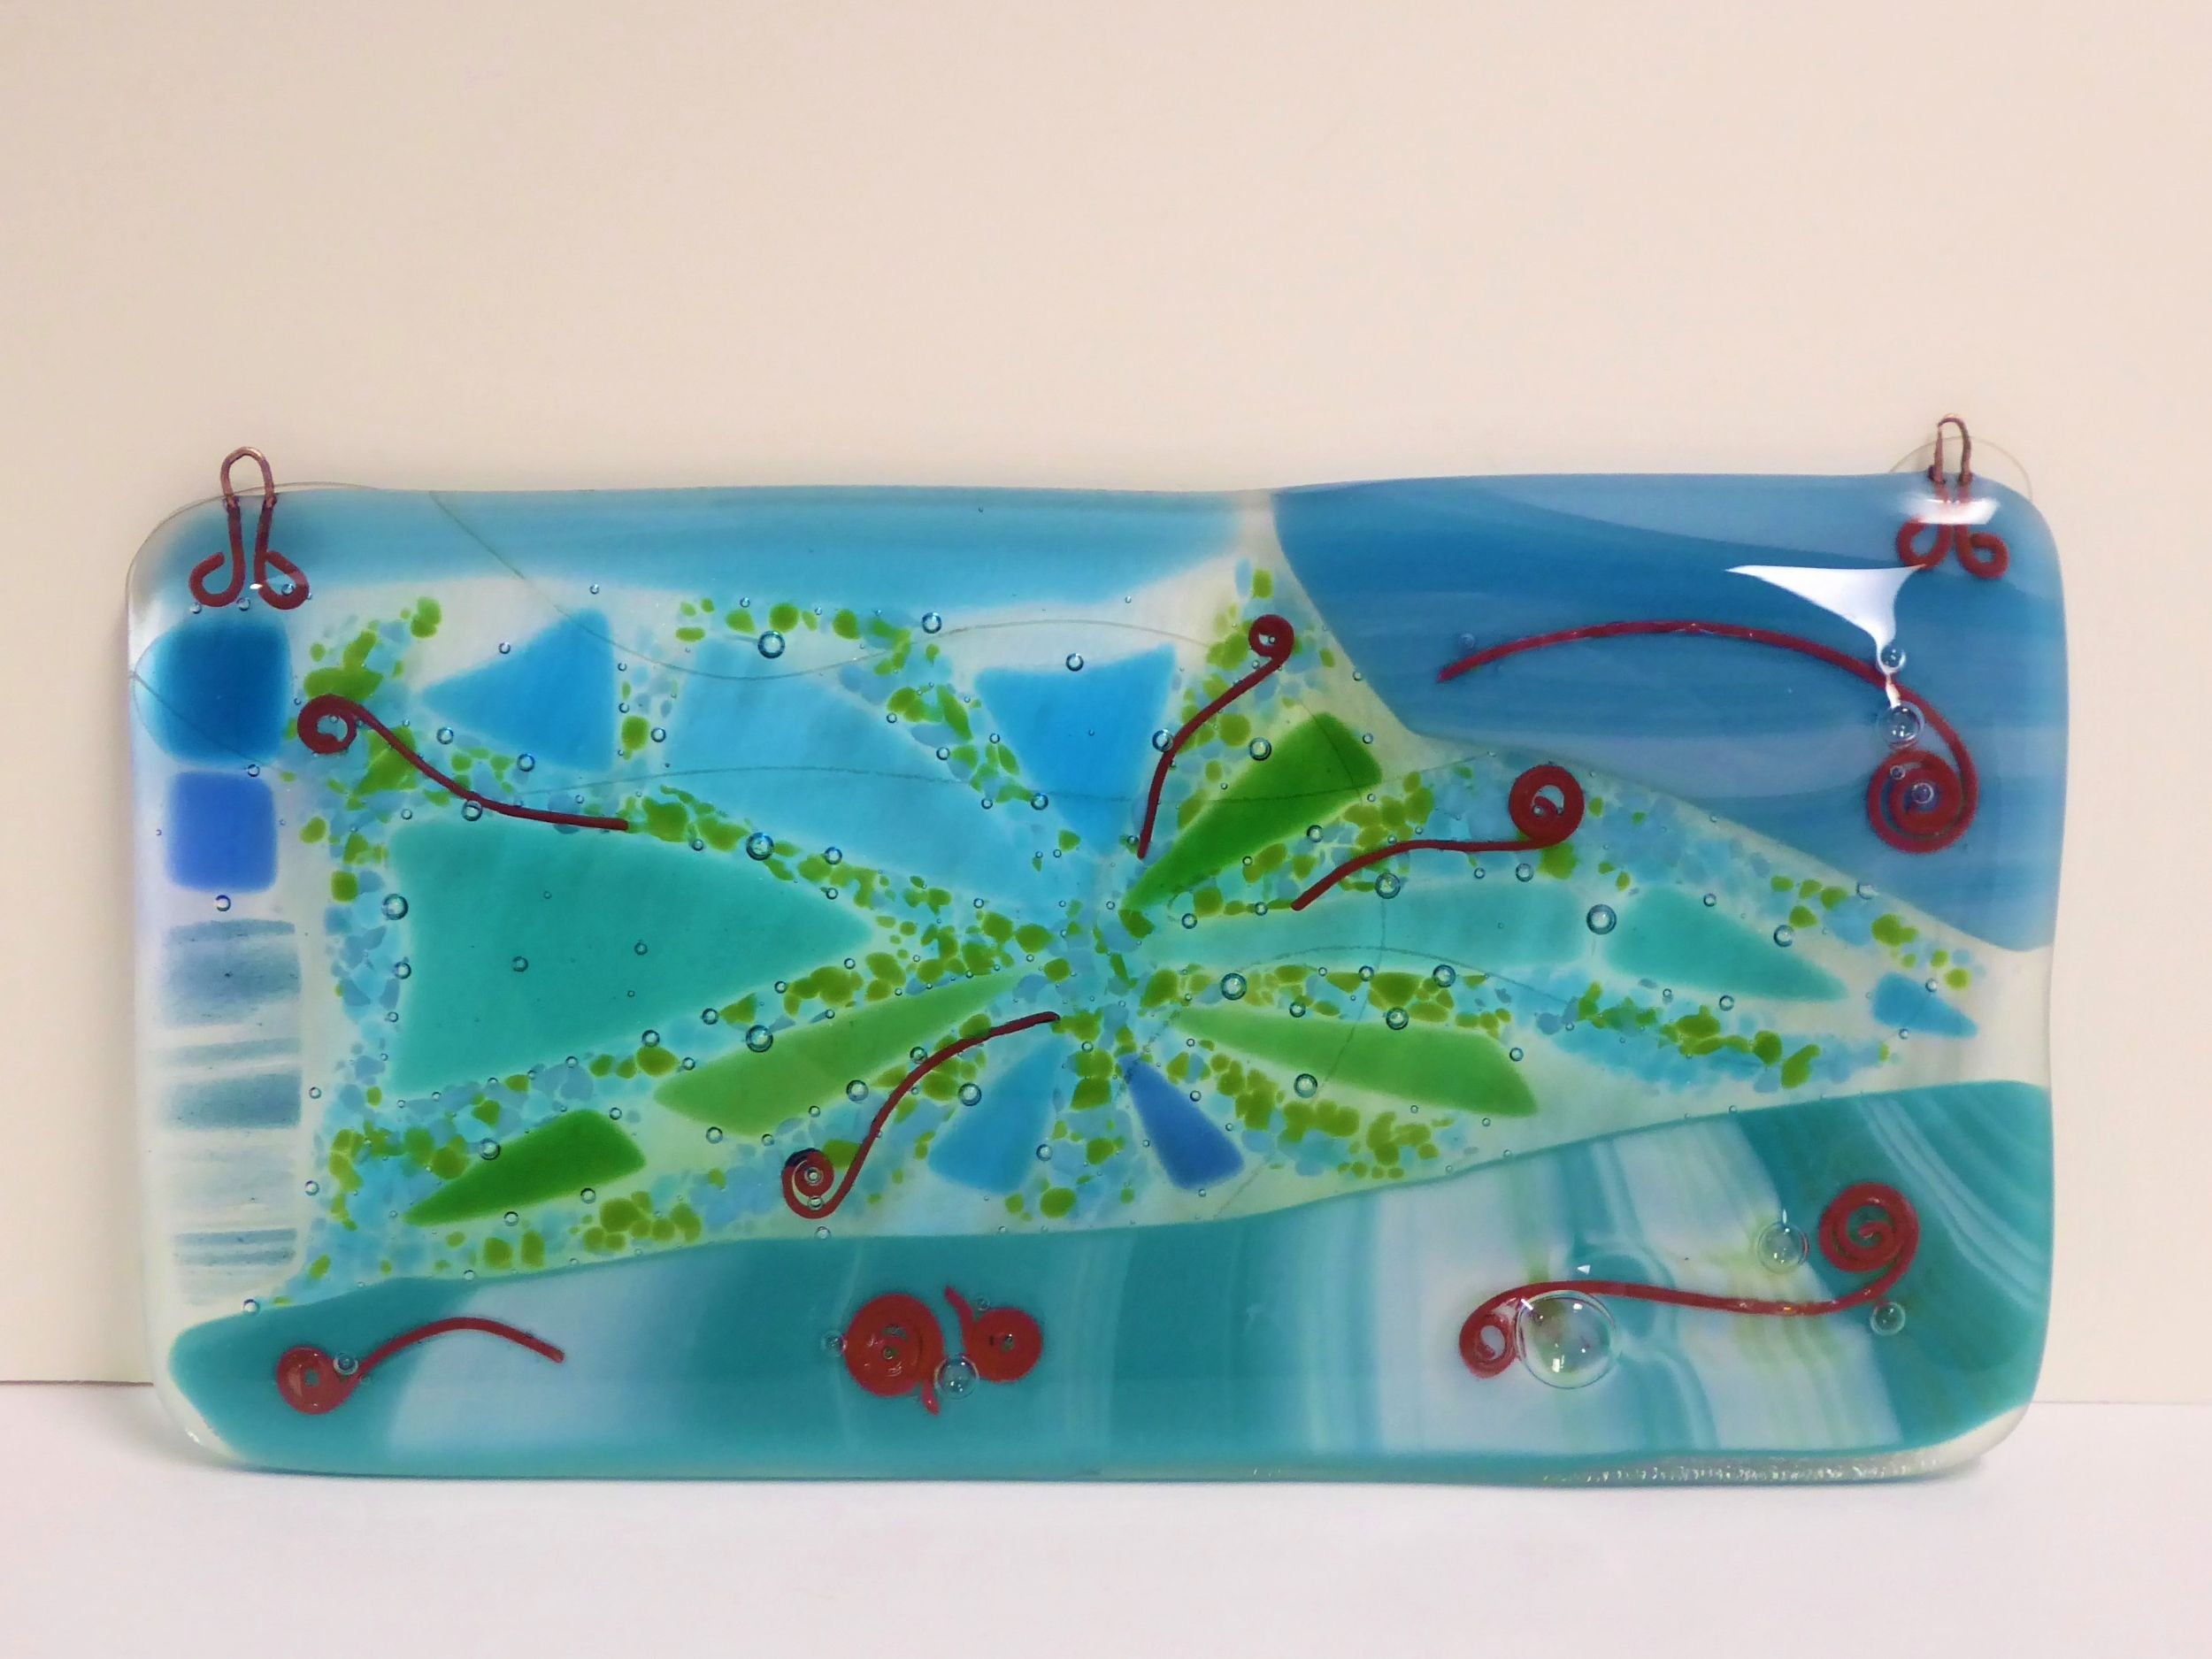 Eva Glass Design blue and green fused glass wall panels